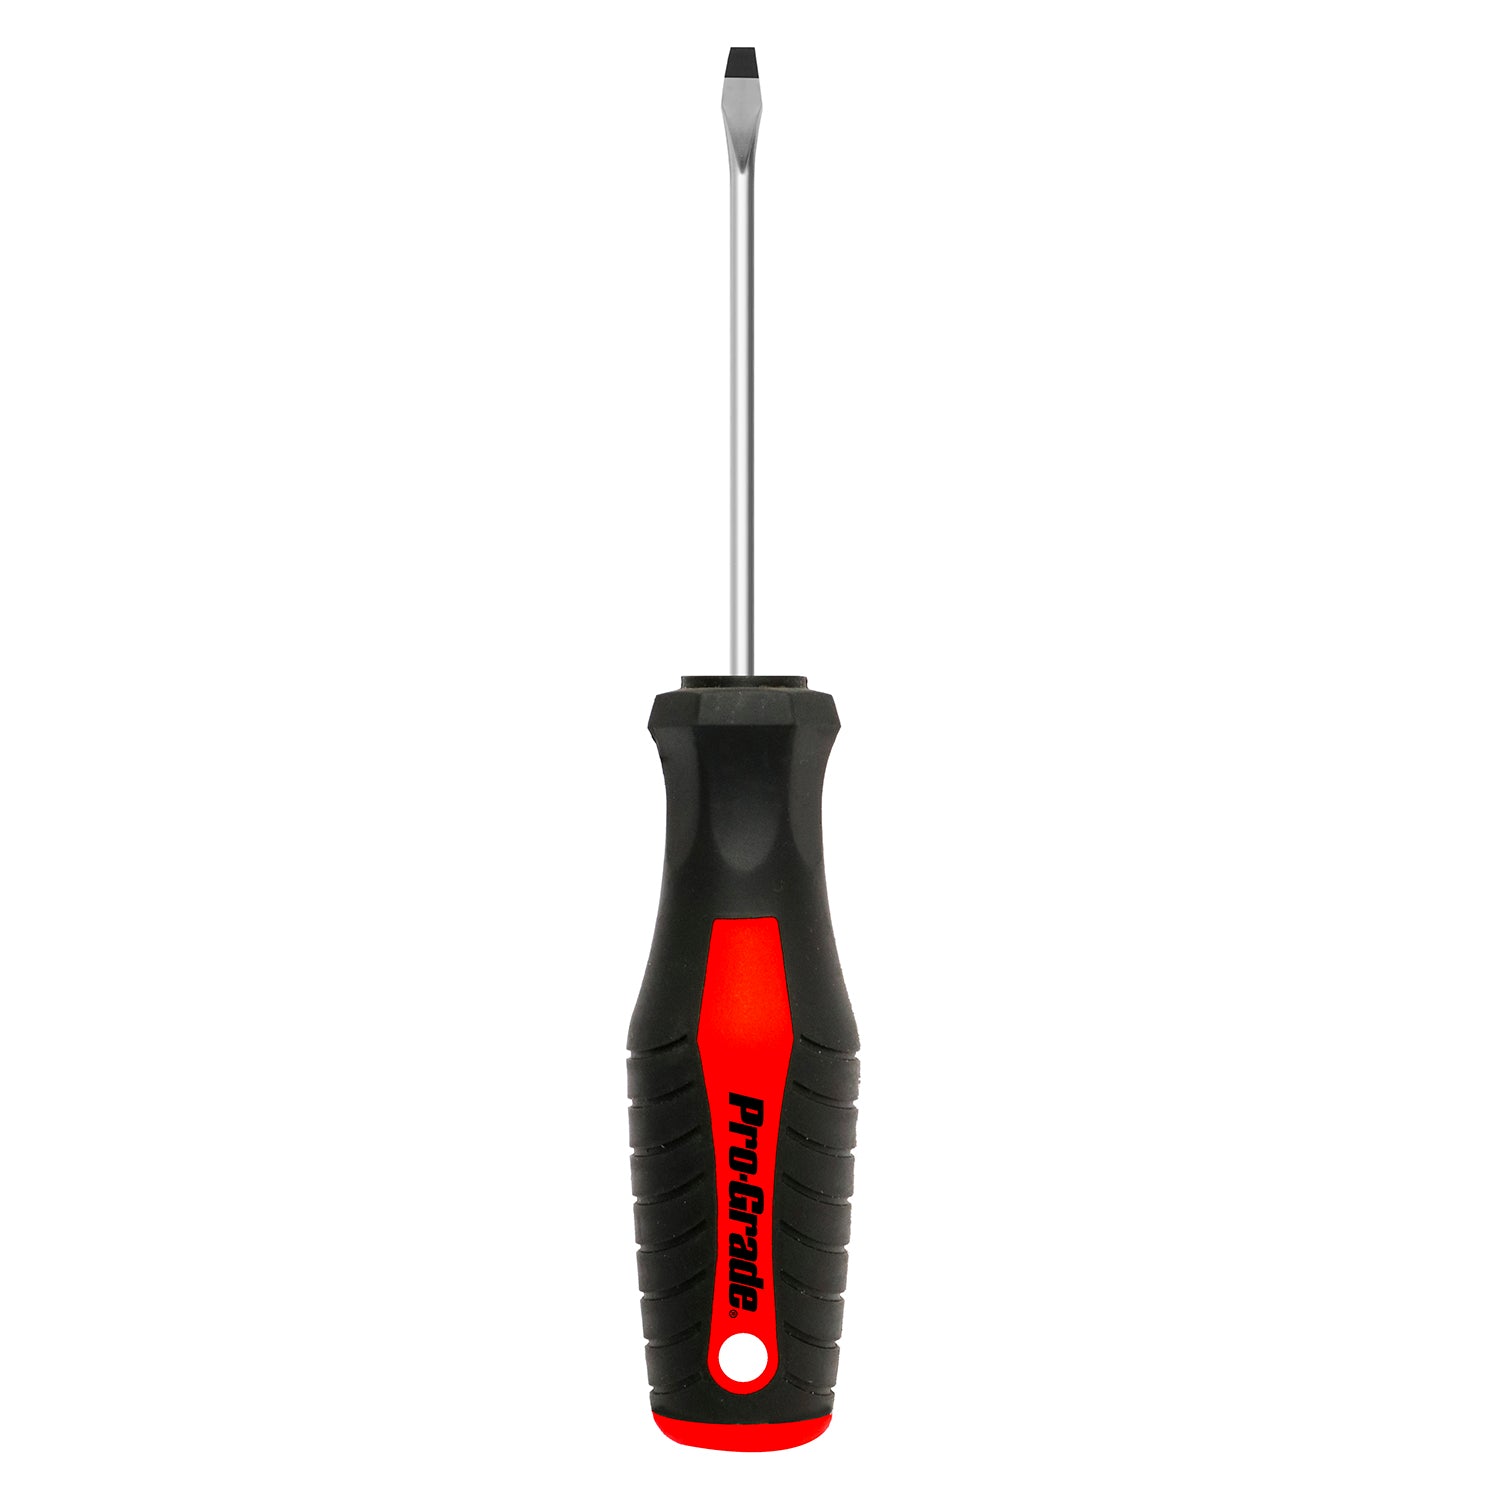 1/8X3" SLOTTED SCREWDRIVER